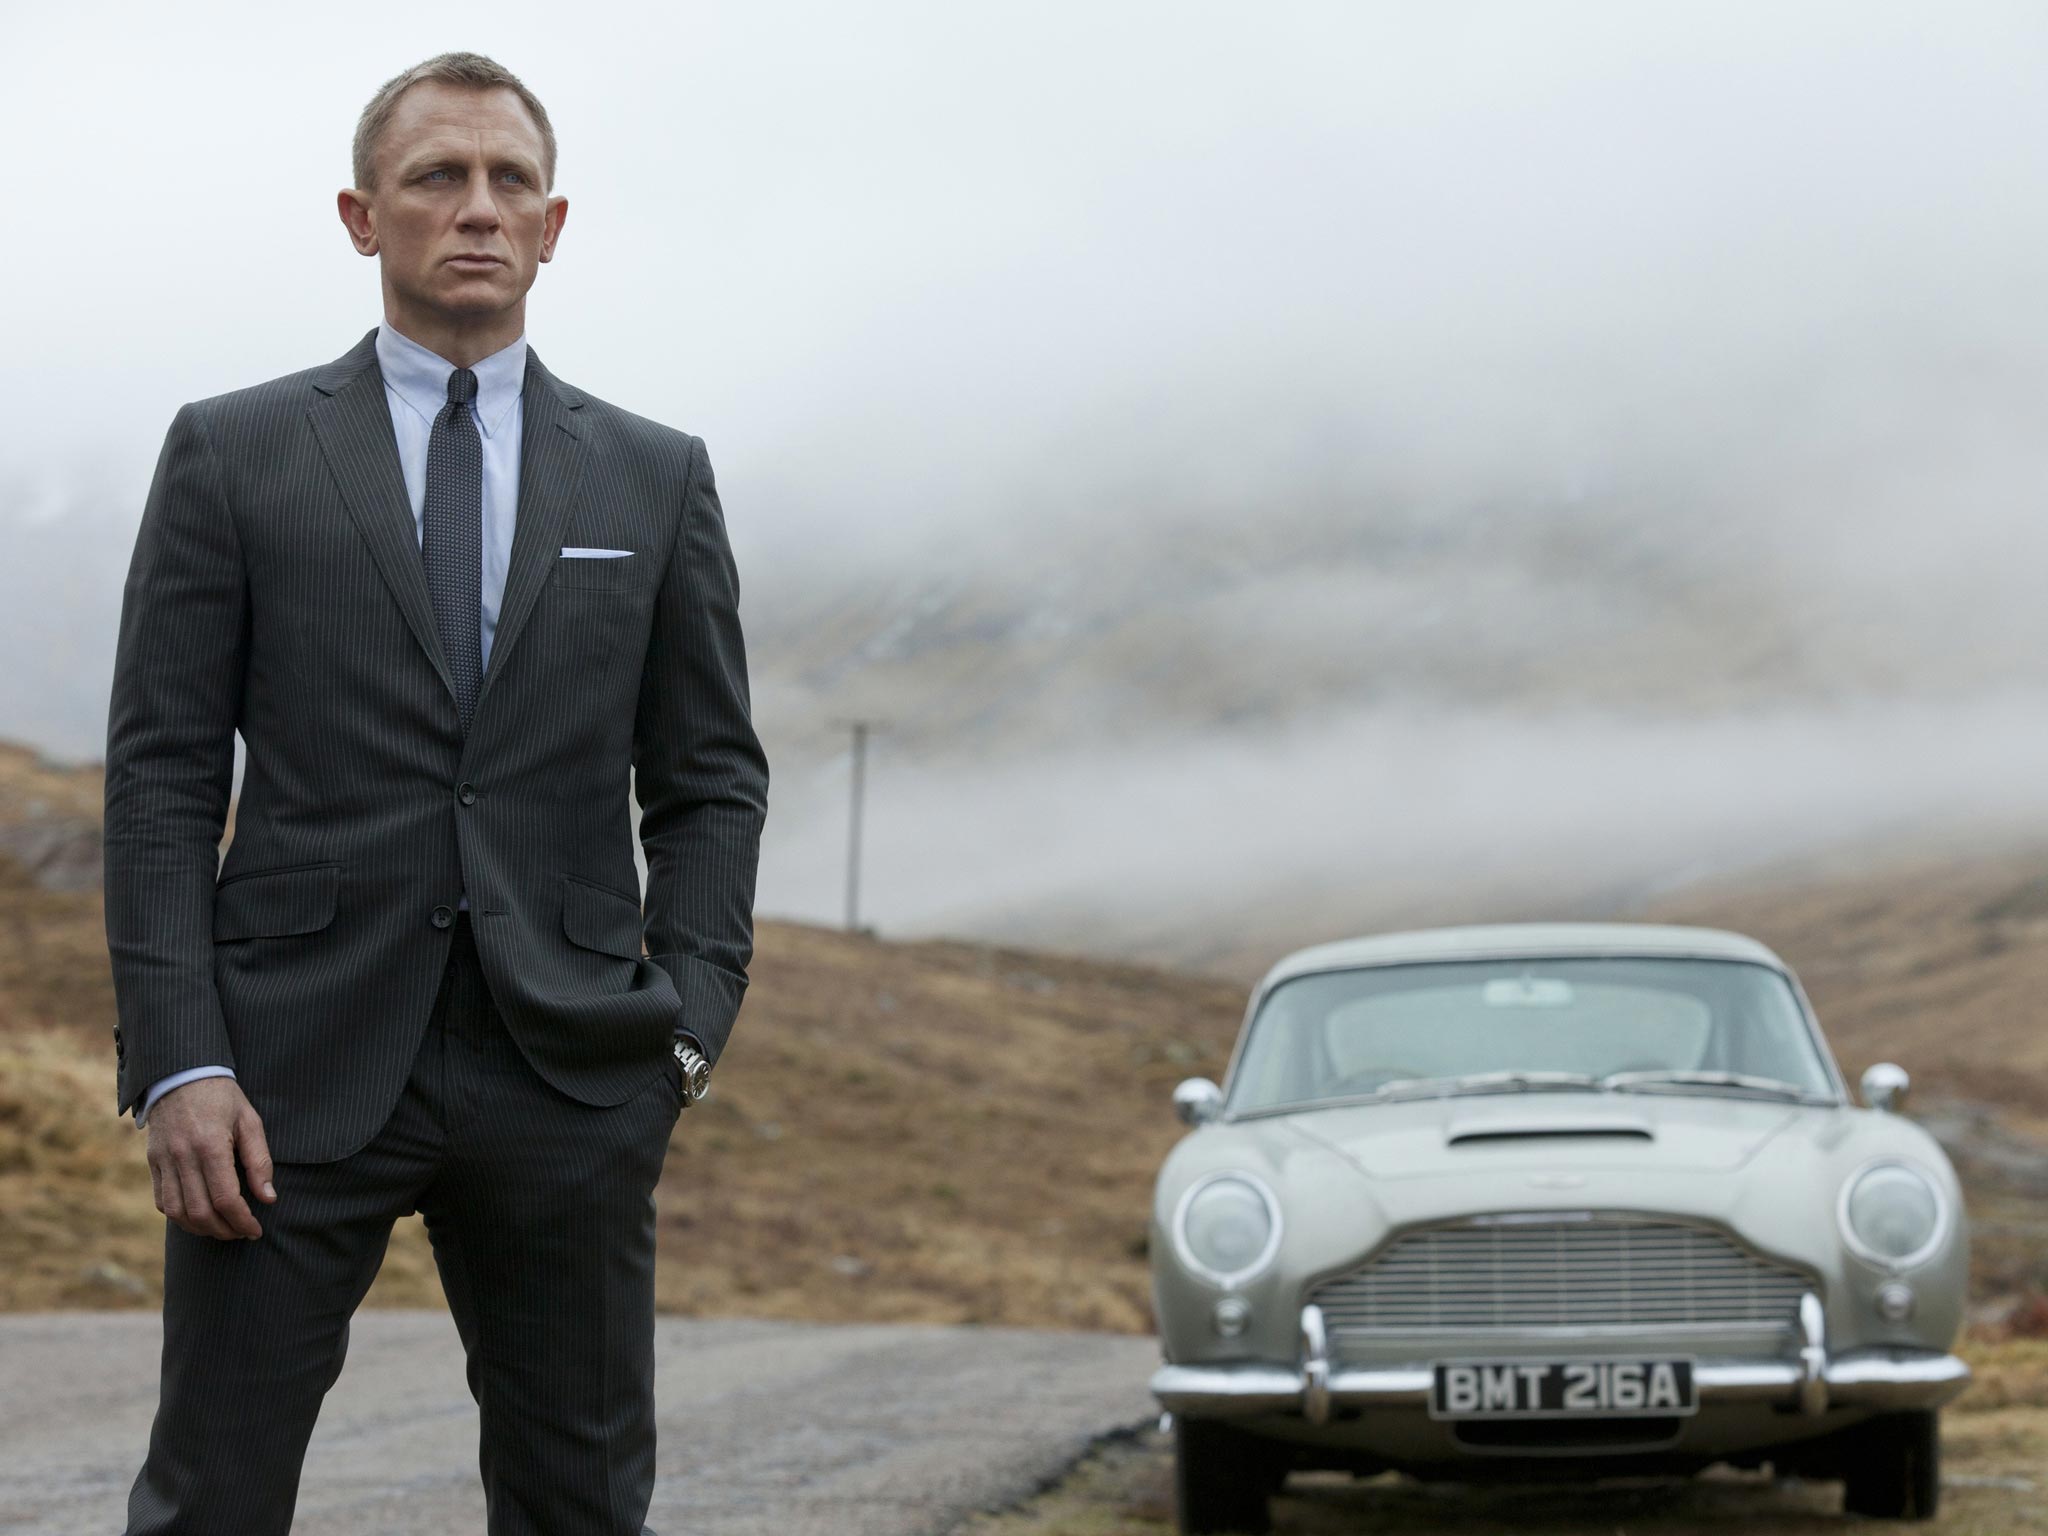 In summer dozens of partygoers turn up who want to relive the Bond experience in Scotland